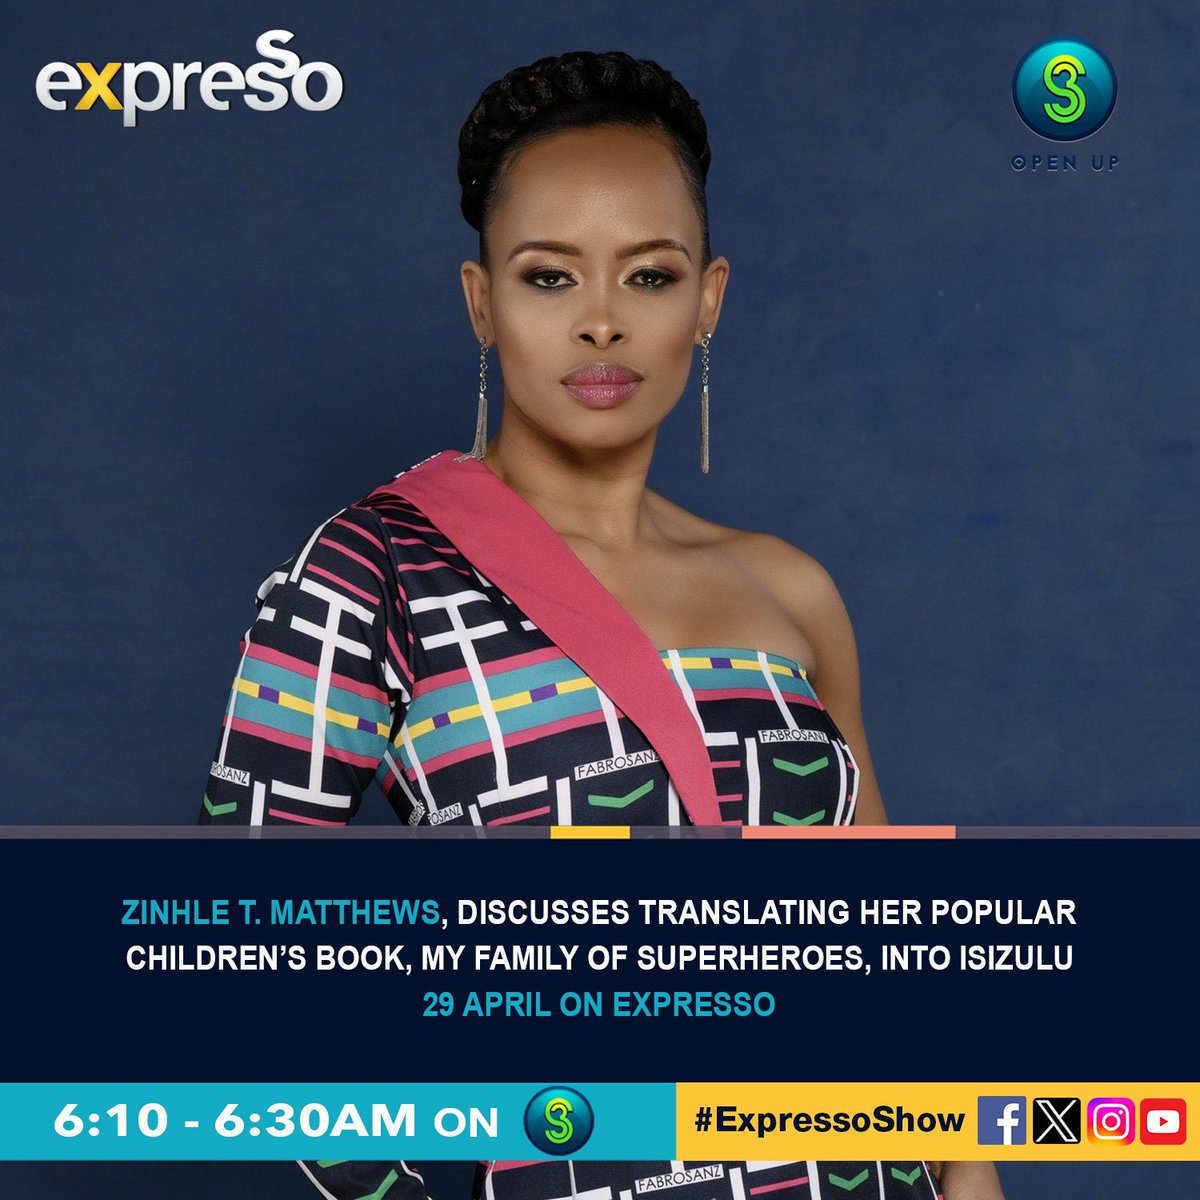 The languages we speak may be different but there is power in a shared story, let’s learn more about My Family of Superheroes and its recent translation into isiZulu 📖 #ExpressoShow